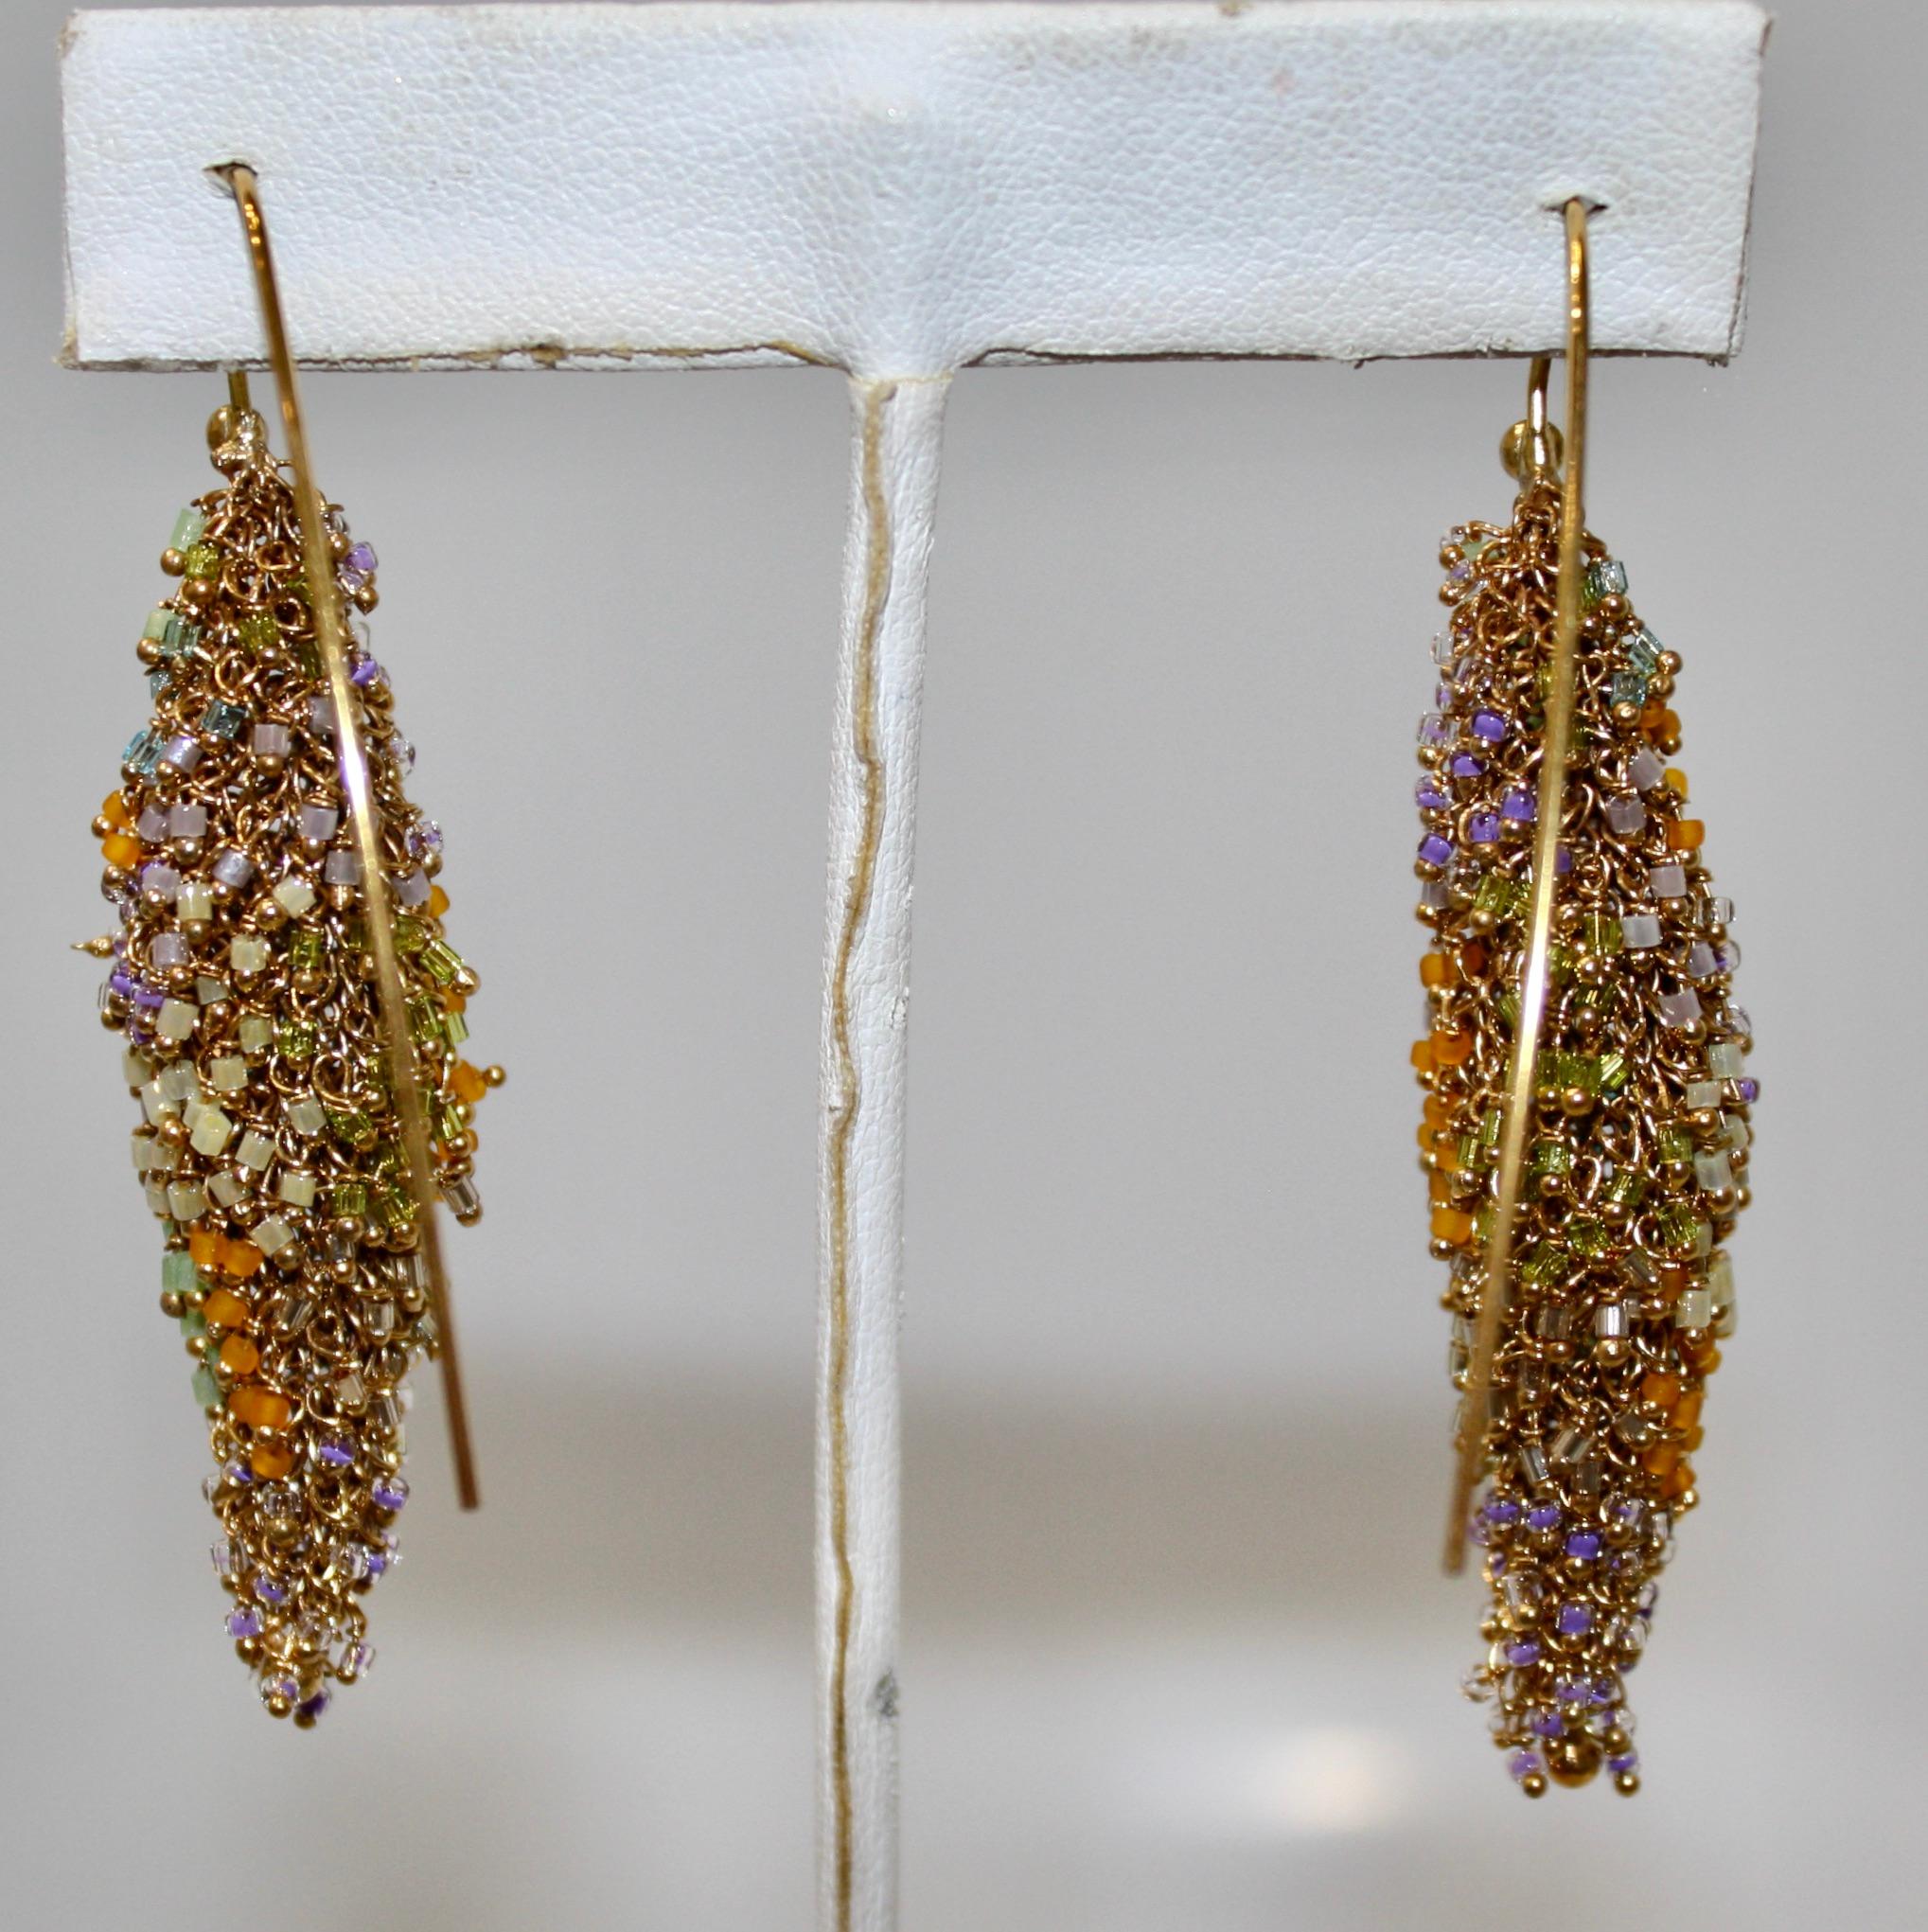 These edgy Milena Zu earrings are made of fine brass wire which is gold plated. It is decorated with hundreds of tiny Swarovski beads in shade of gold, green , orange and lavender. Each little bead is attached by hand and placed with